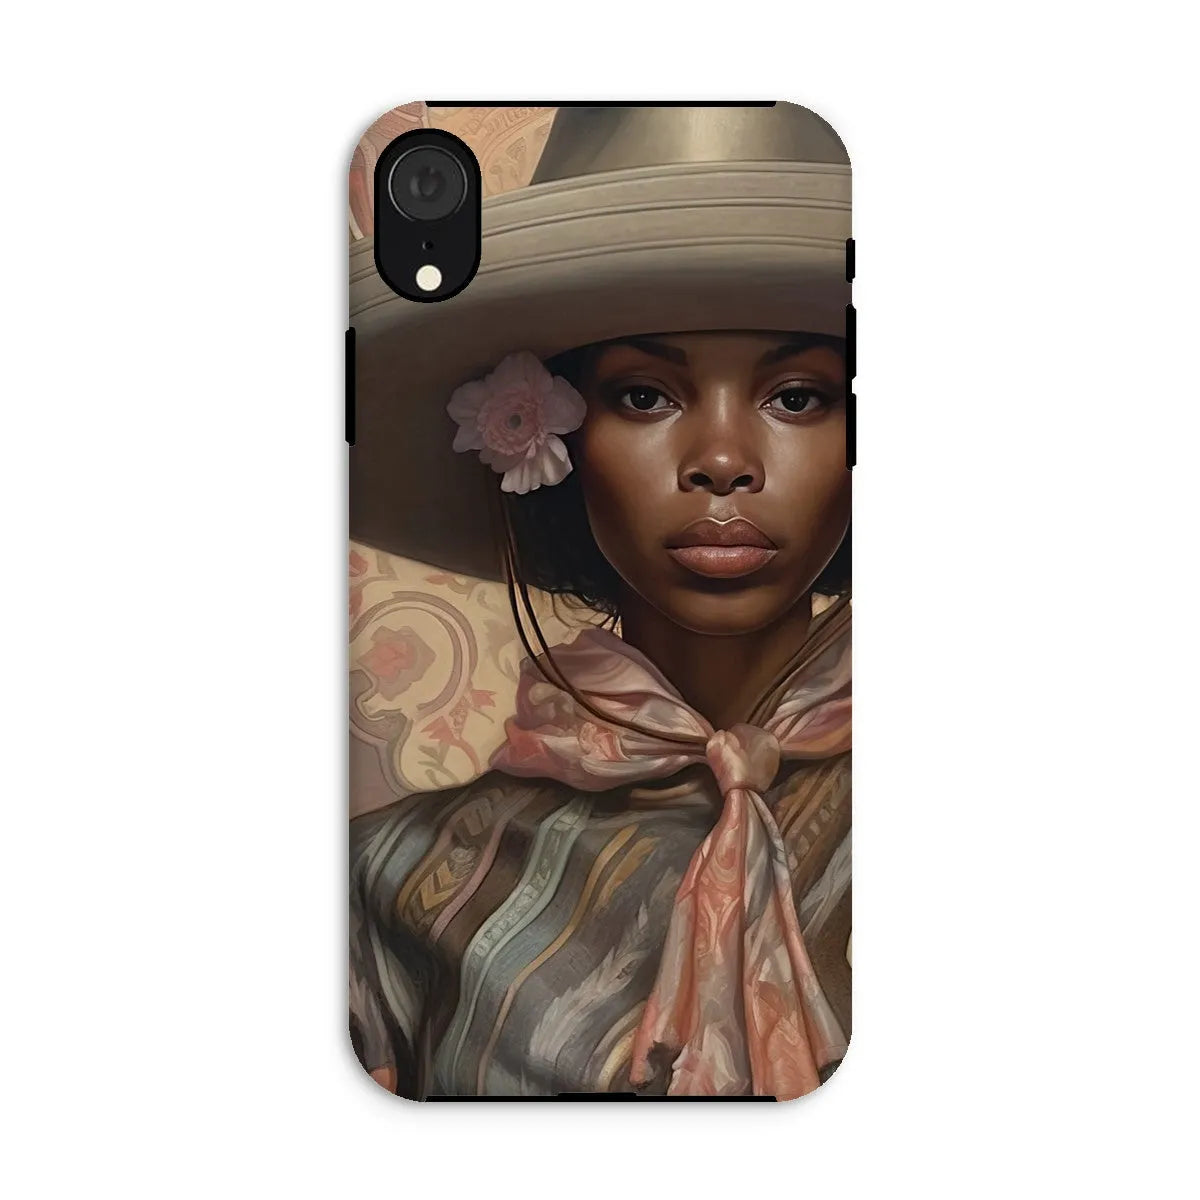 Sadie The Lesbian Cowgirl - Sapphic Art Phone Case - Iphone Xr / Matte - Mobile Phone Cases - Aesthetic Art